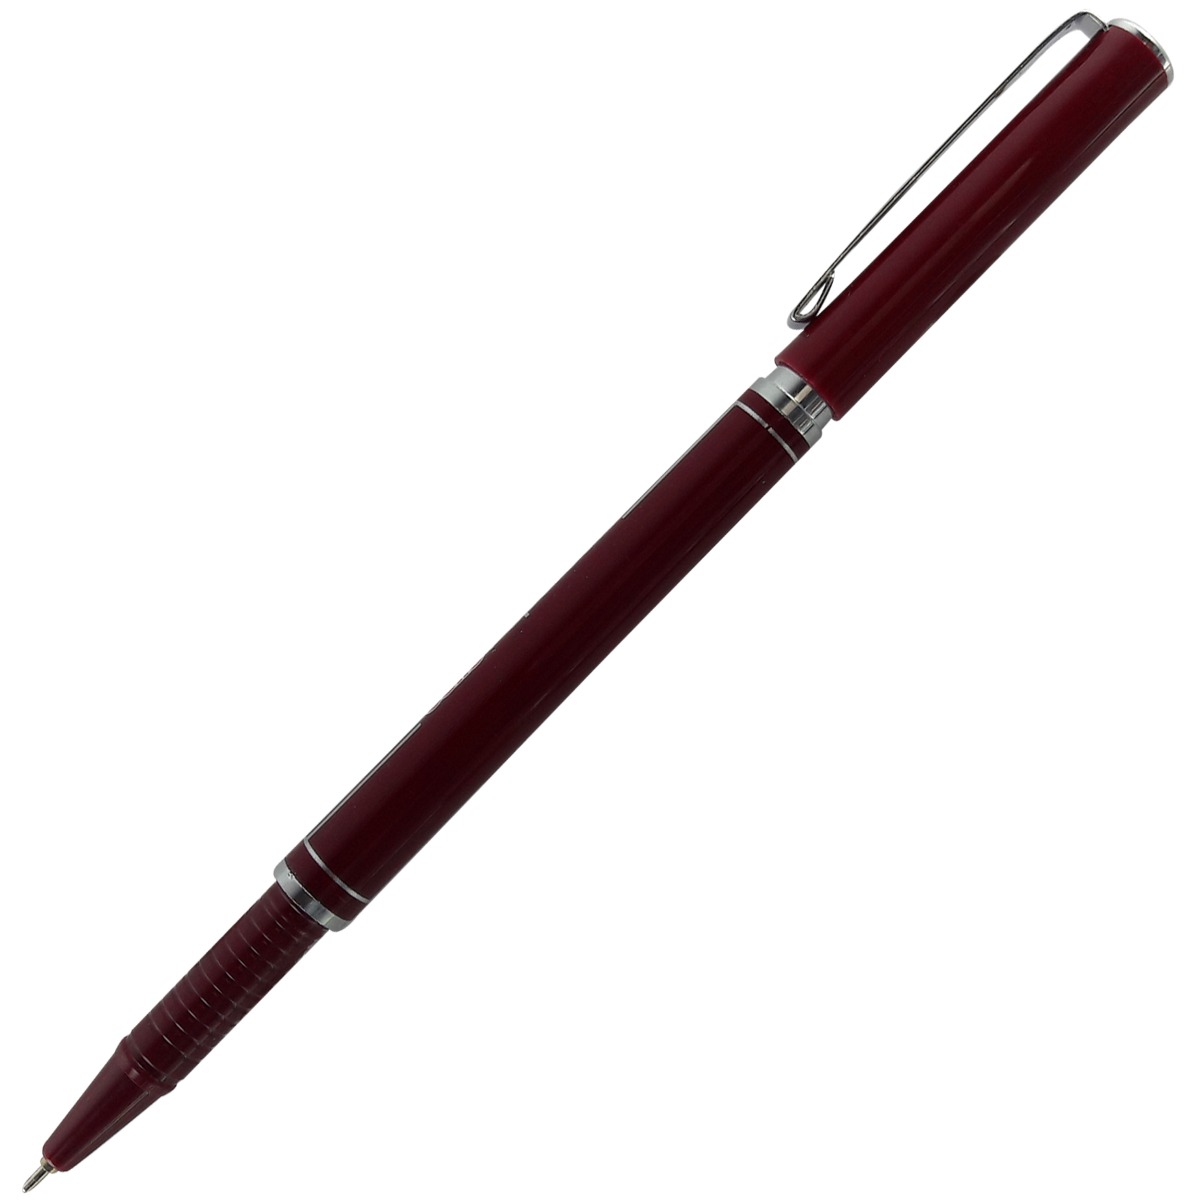 Cello Papersoft Red Color Slim Body with Cap Type Ball Pen  SKU 12443